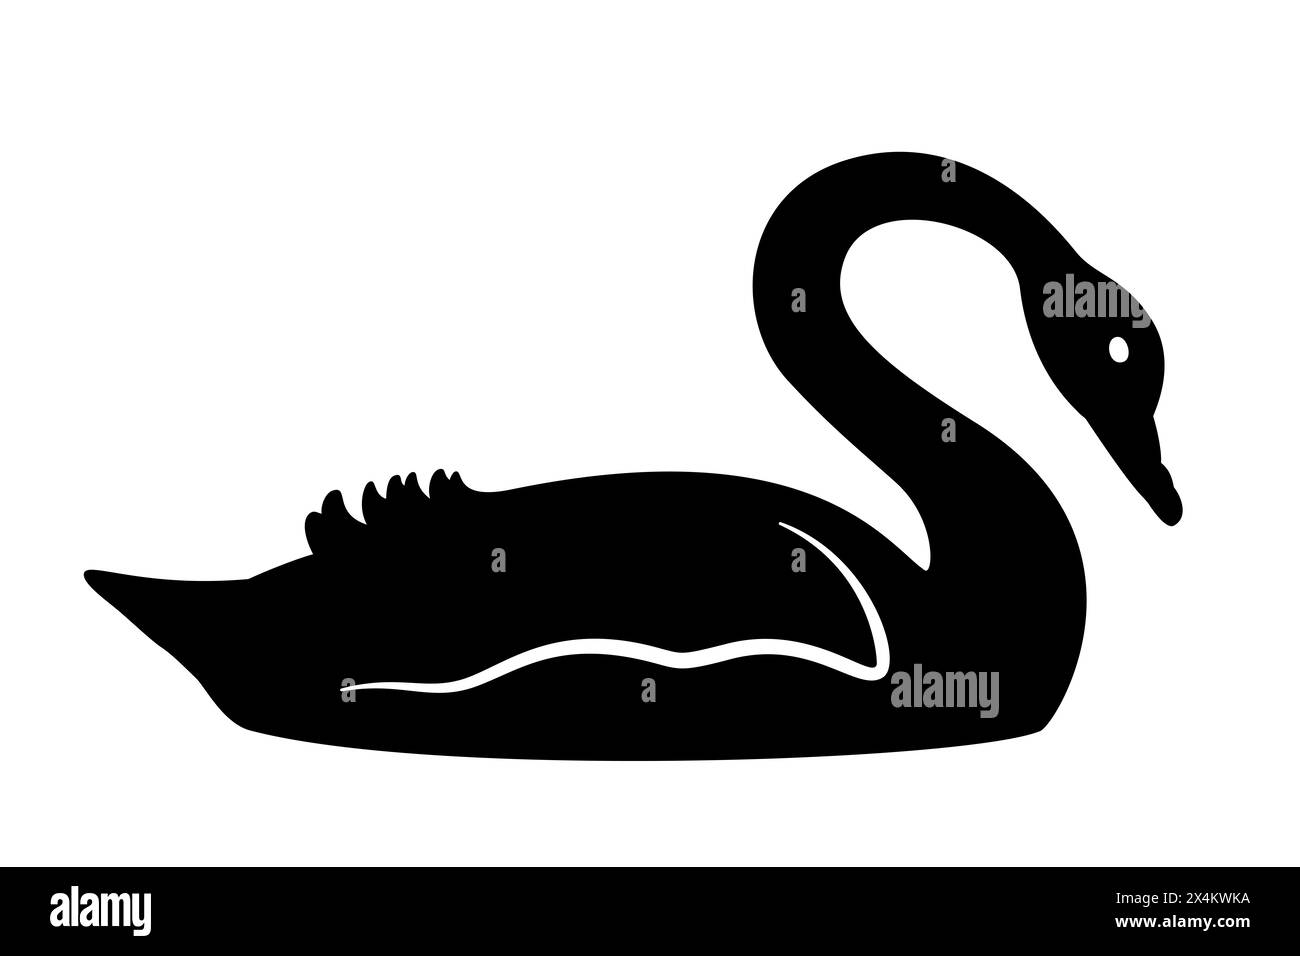 Black swan outline and silhouette of a large waterbird. A symbol for black swan events and theory, a metaphor for unexpected events of large magnitude Stock Photo